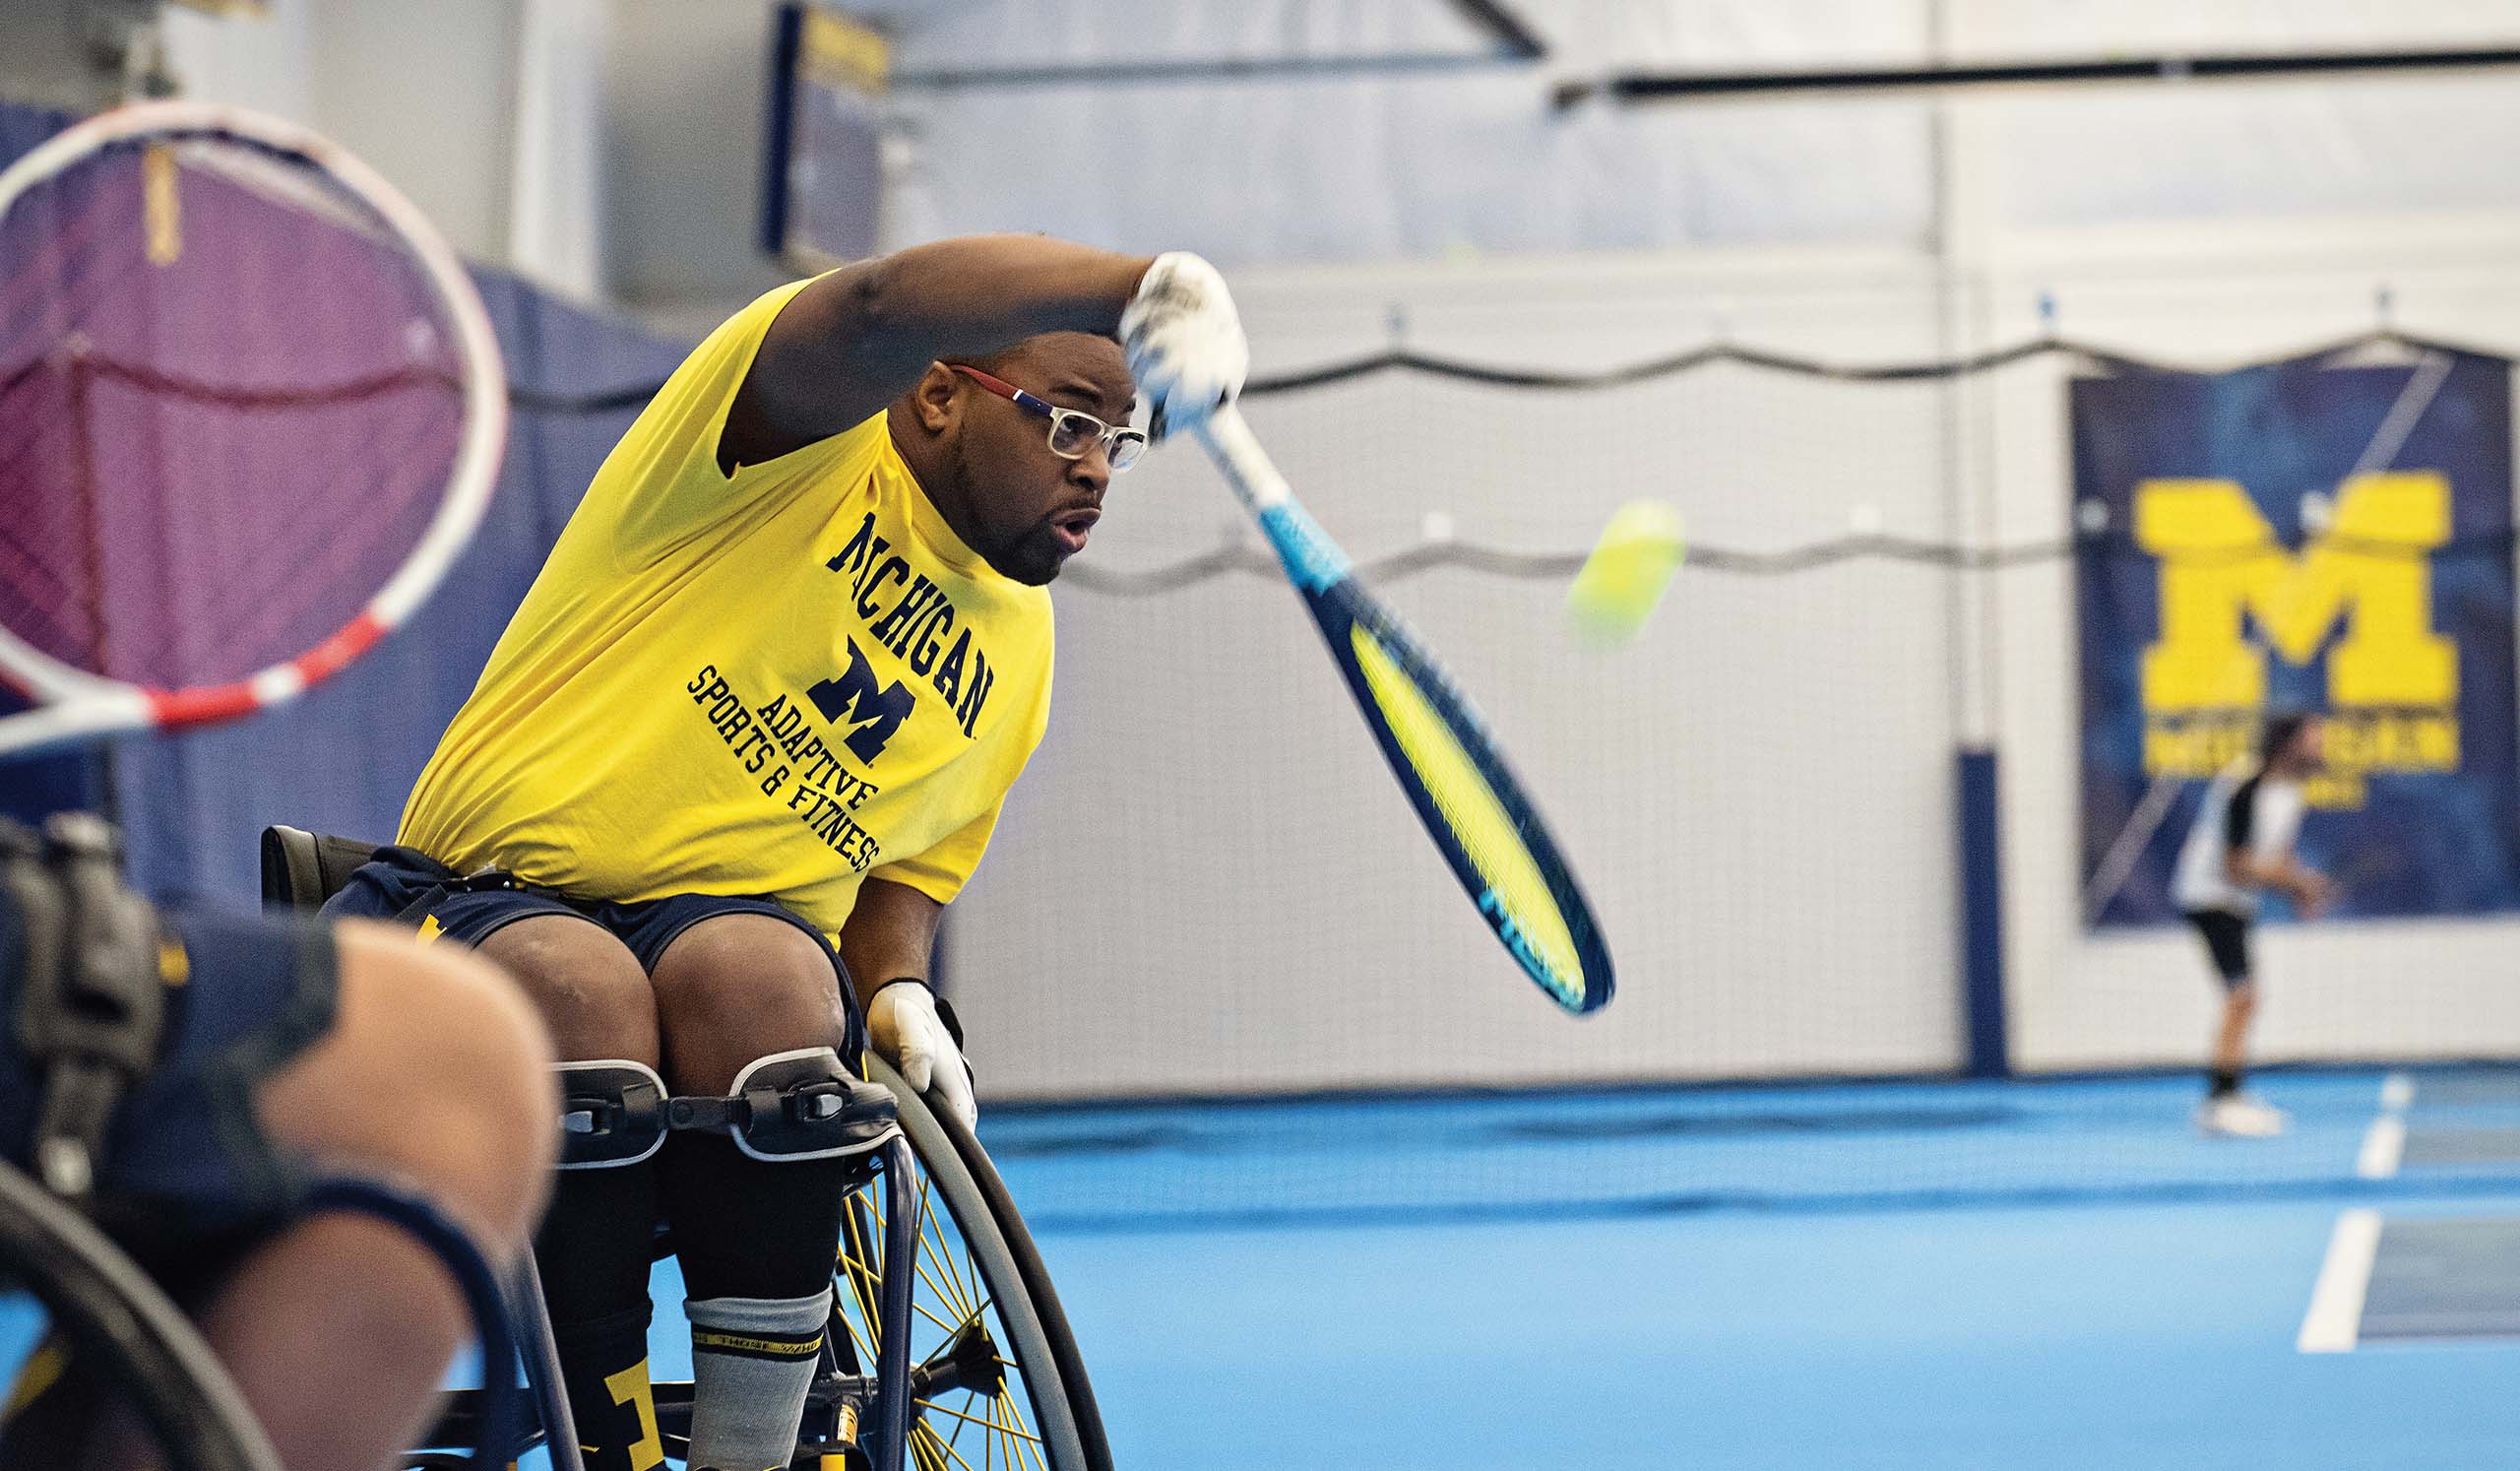 Tennis player in wheelchair hits tennis ball with racket